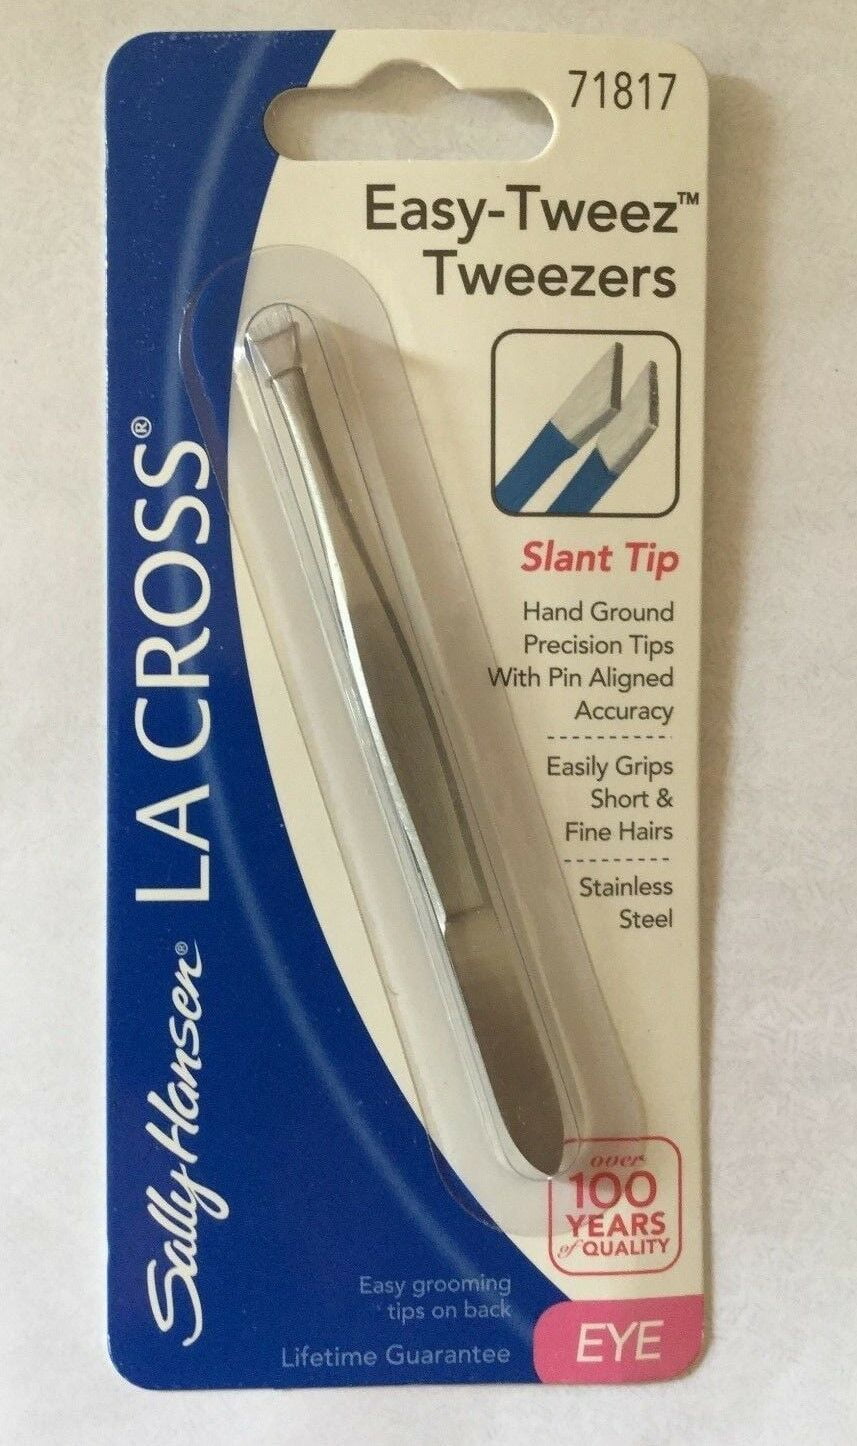 SINGER Slant Tip Tweezers with Wide-Grip for Sewing, Quilting, & Applique